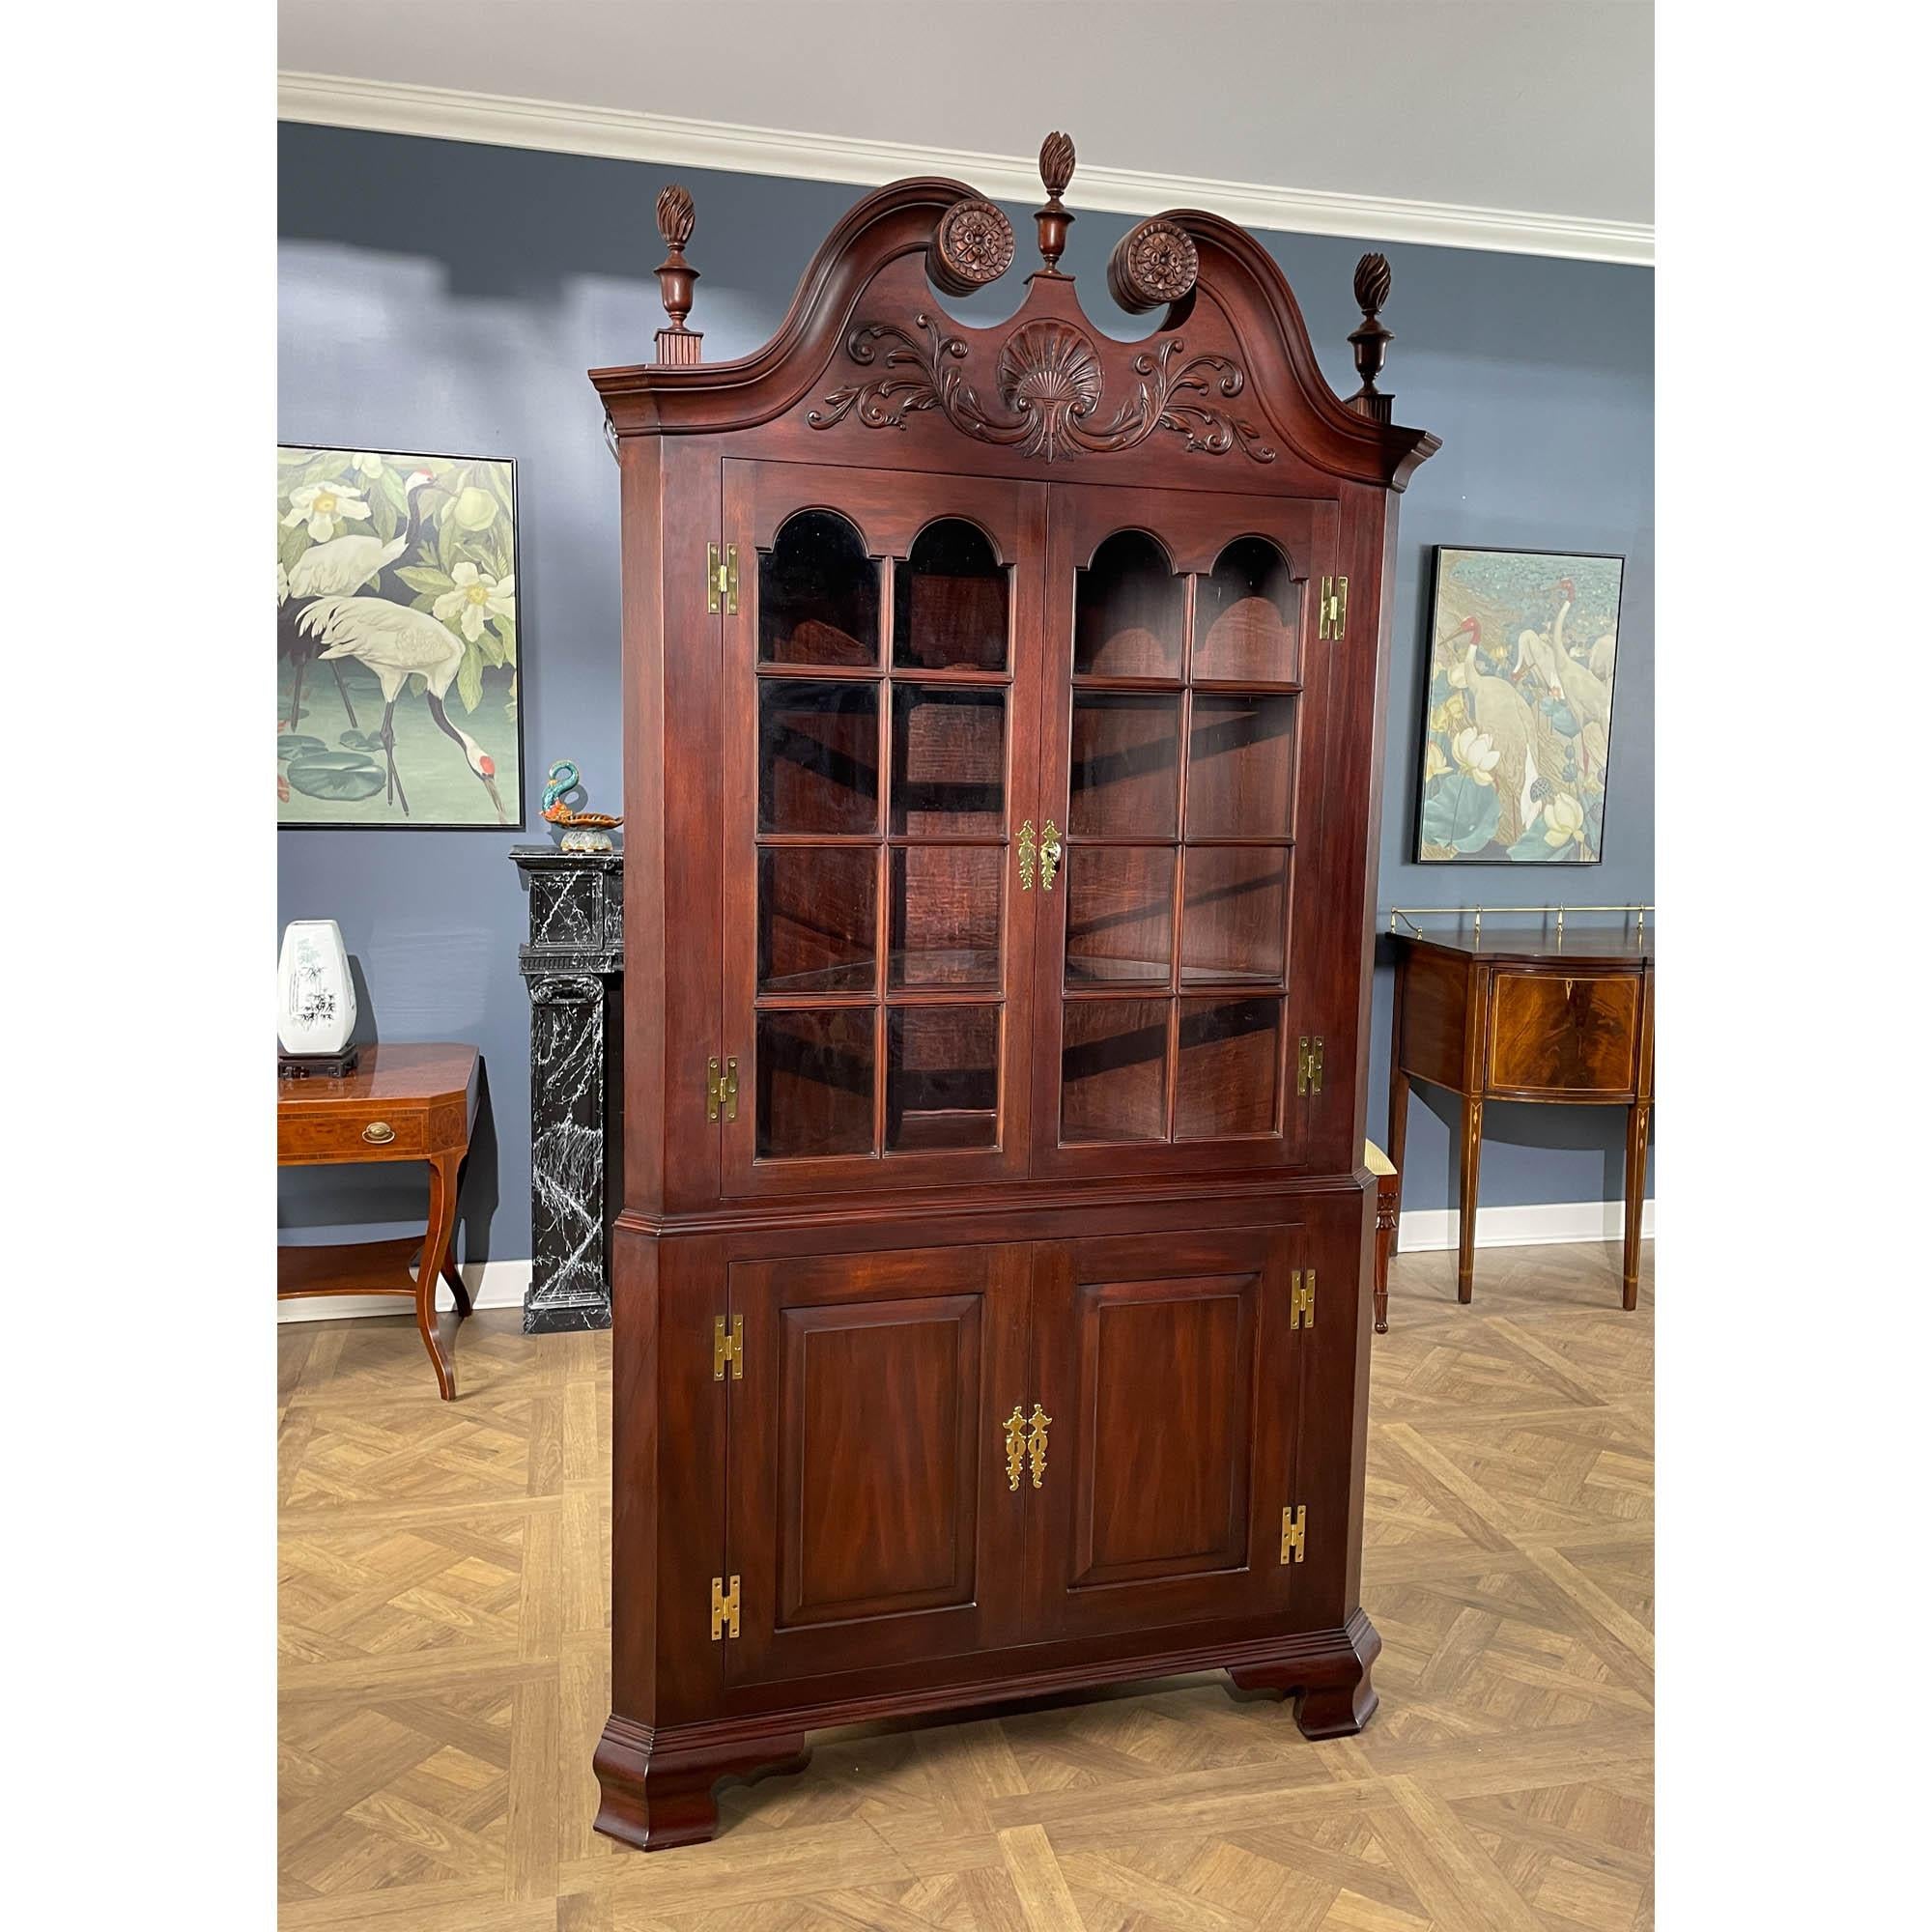 Henkel Harris Mahogany Corner Cabinet In Good Condition For Sale In Annville, PA